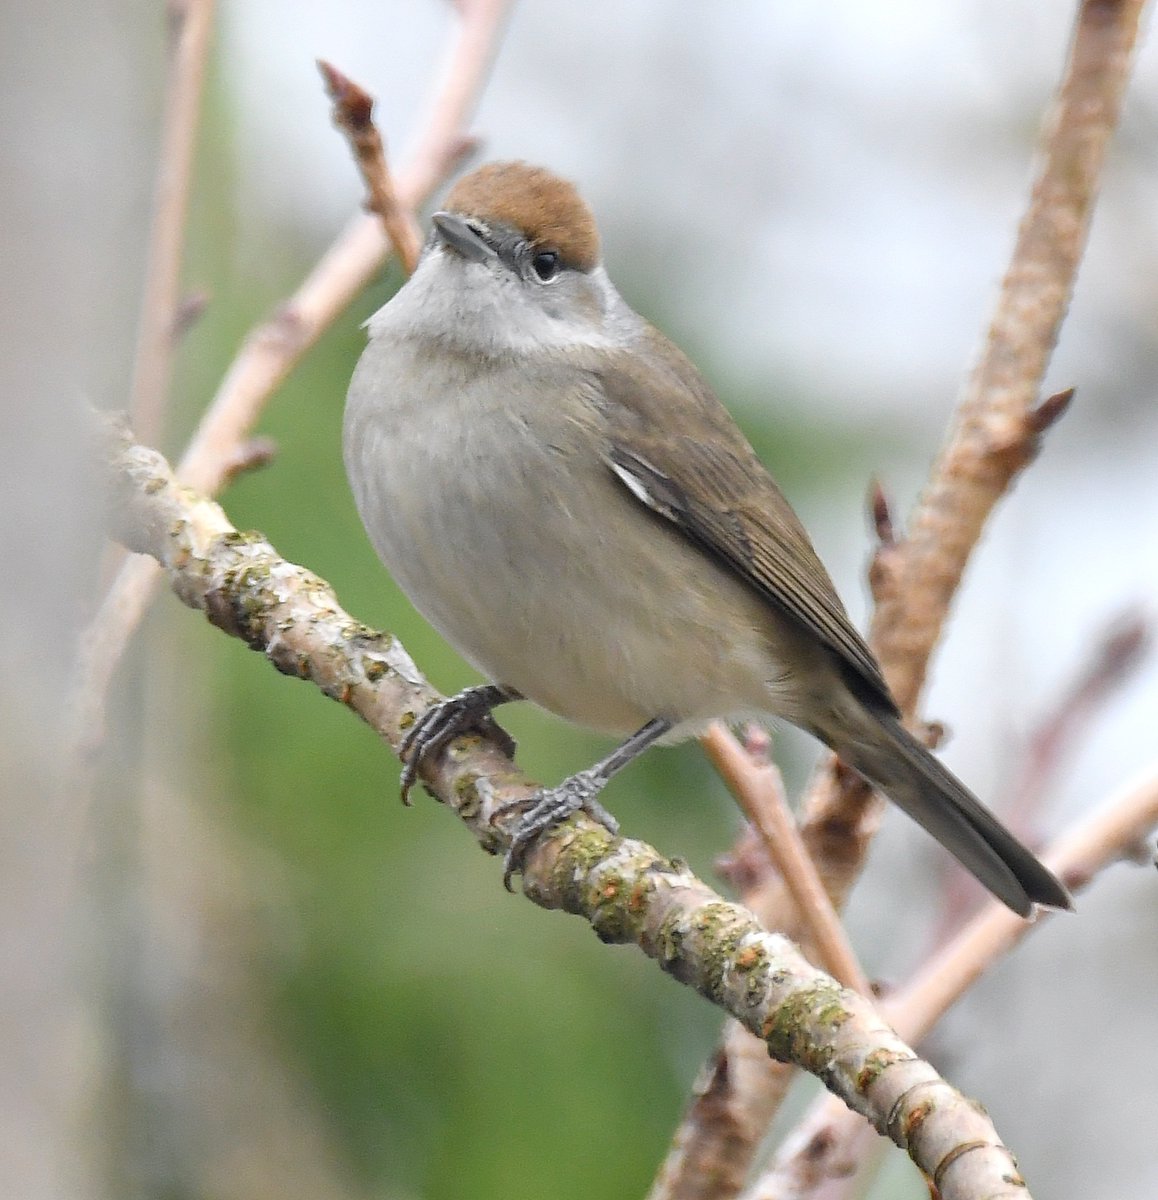 Blackcap.More and more of these Summer visiting warblers are over-wintering in the UK as temperatures rise & winters are less harsh. They've taken to visiting garden feeders to help them survive.Males have the black 'caps', females have brown ones. #SelfIsolationBirdWatch 